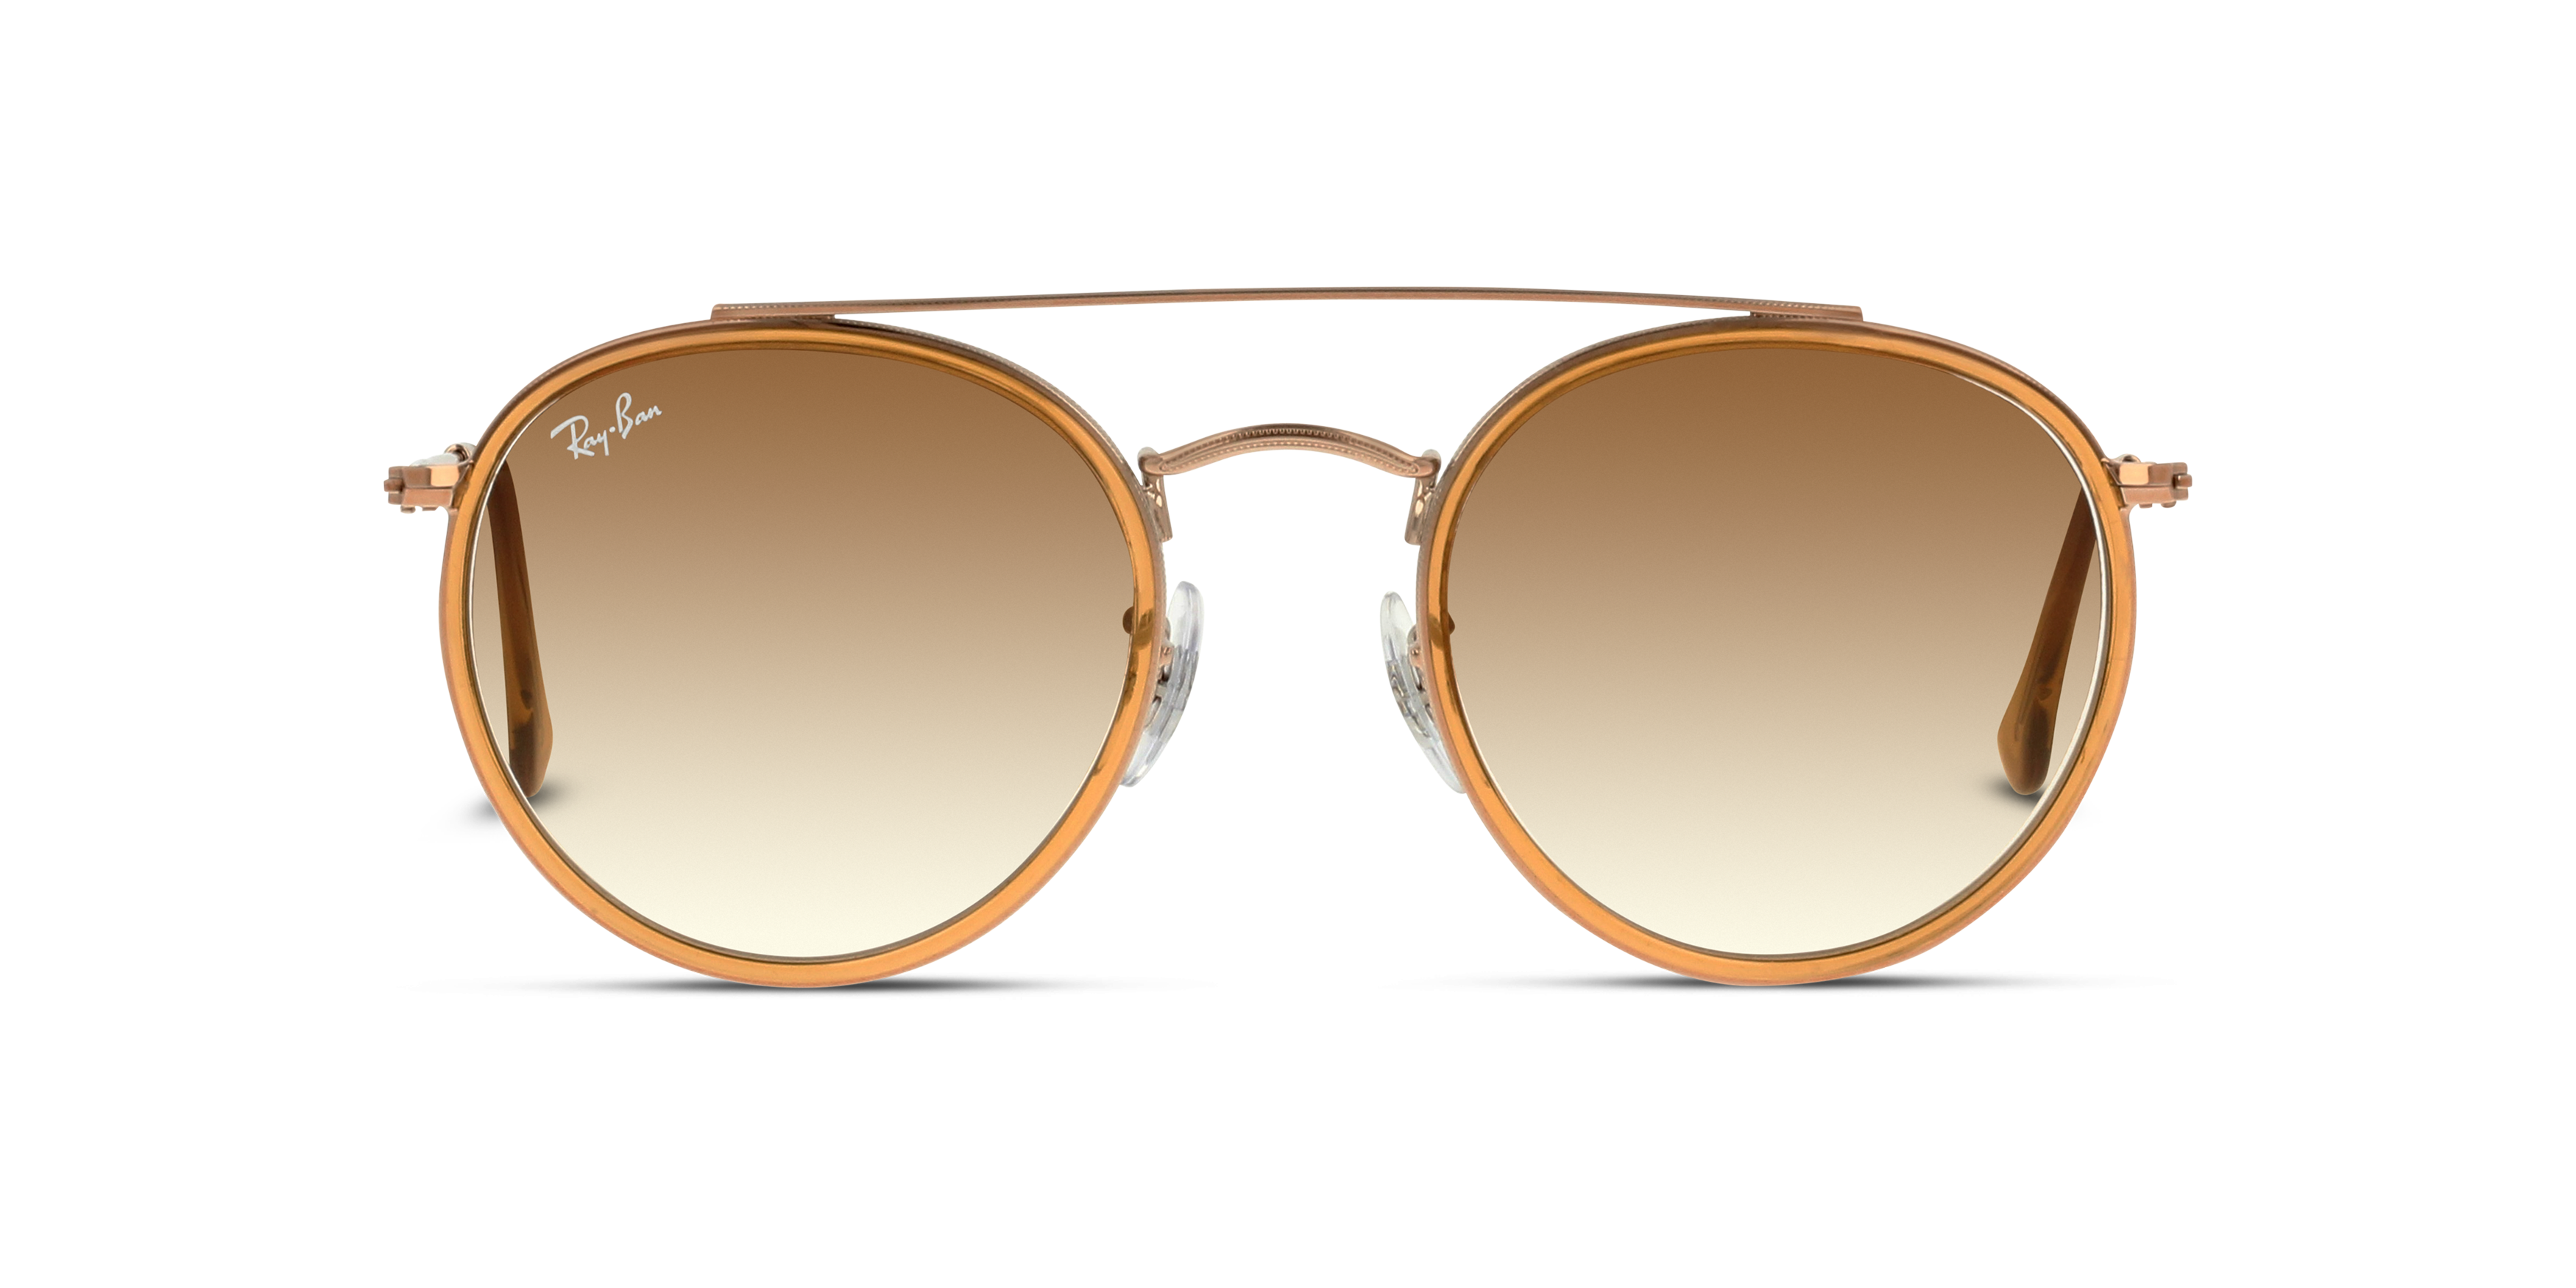 [products.image.front] Ray-Ban Round Double Bridge RB3647N 907051